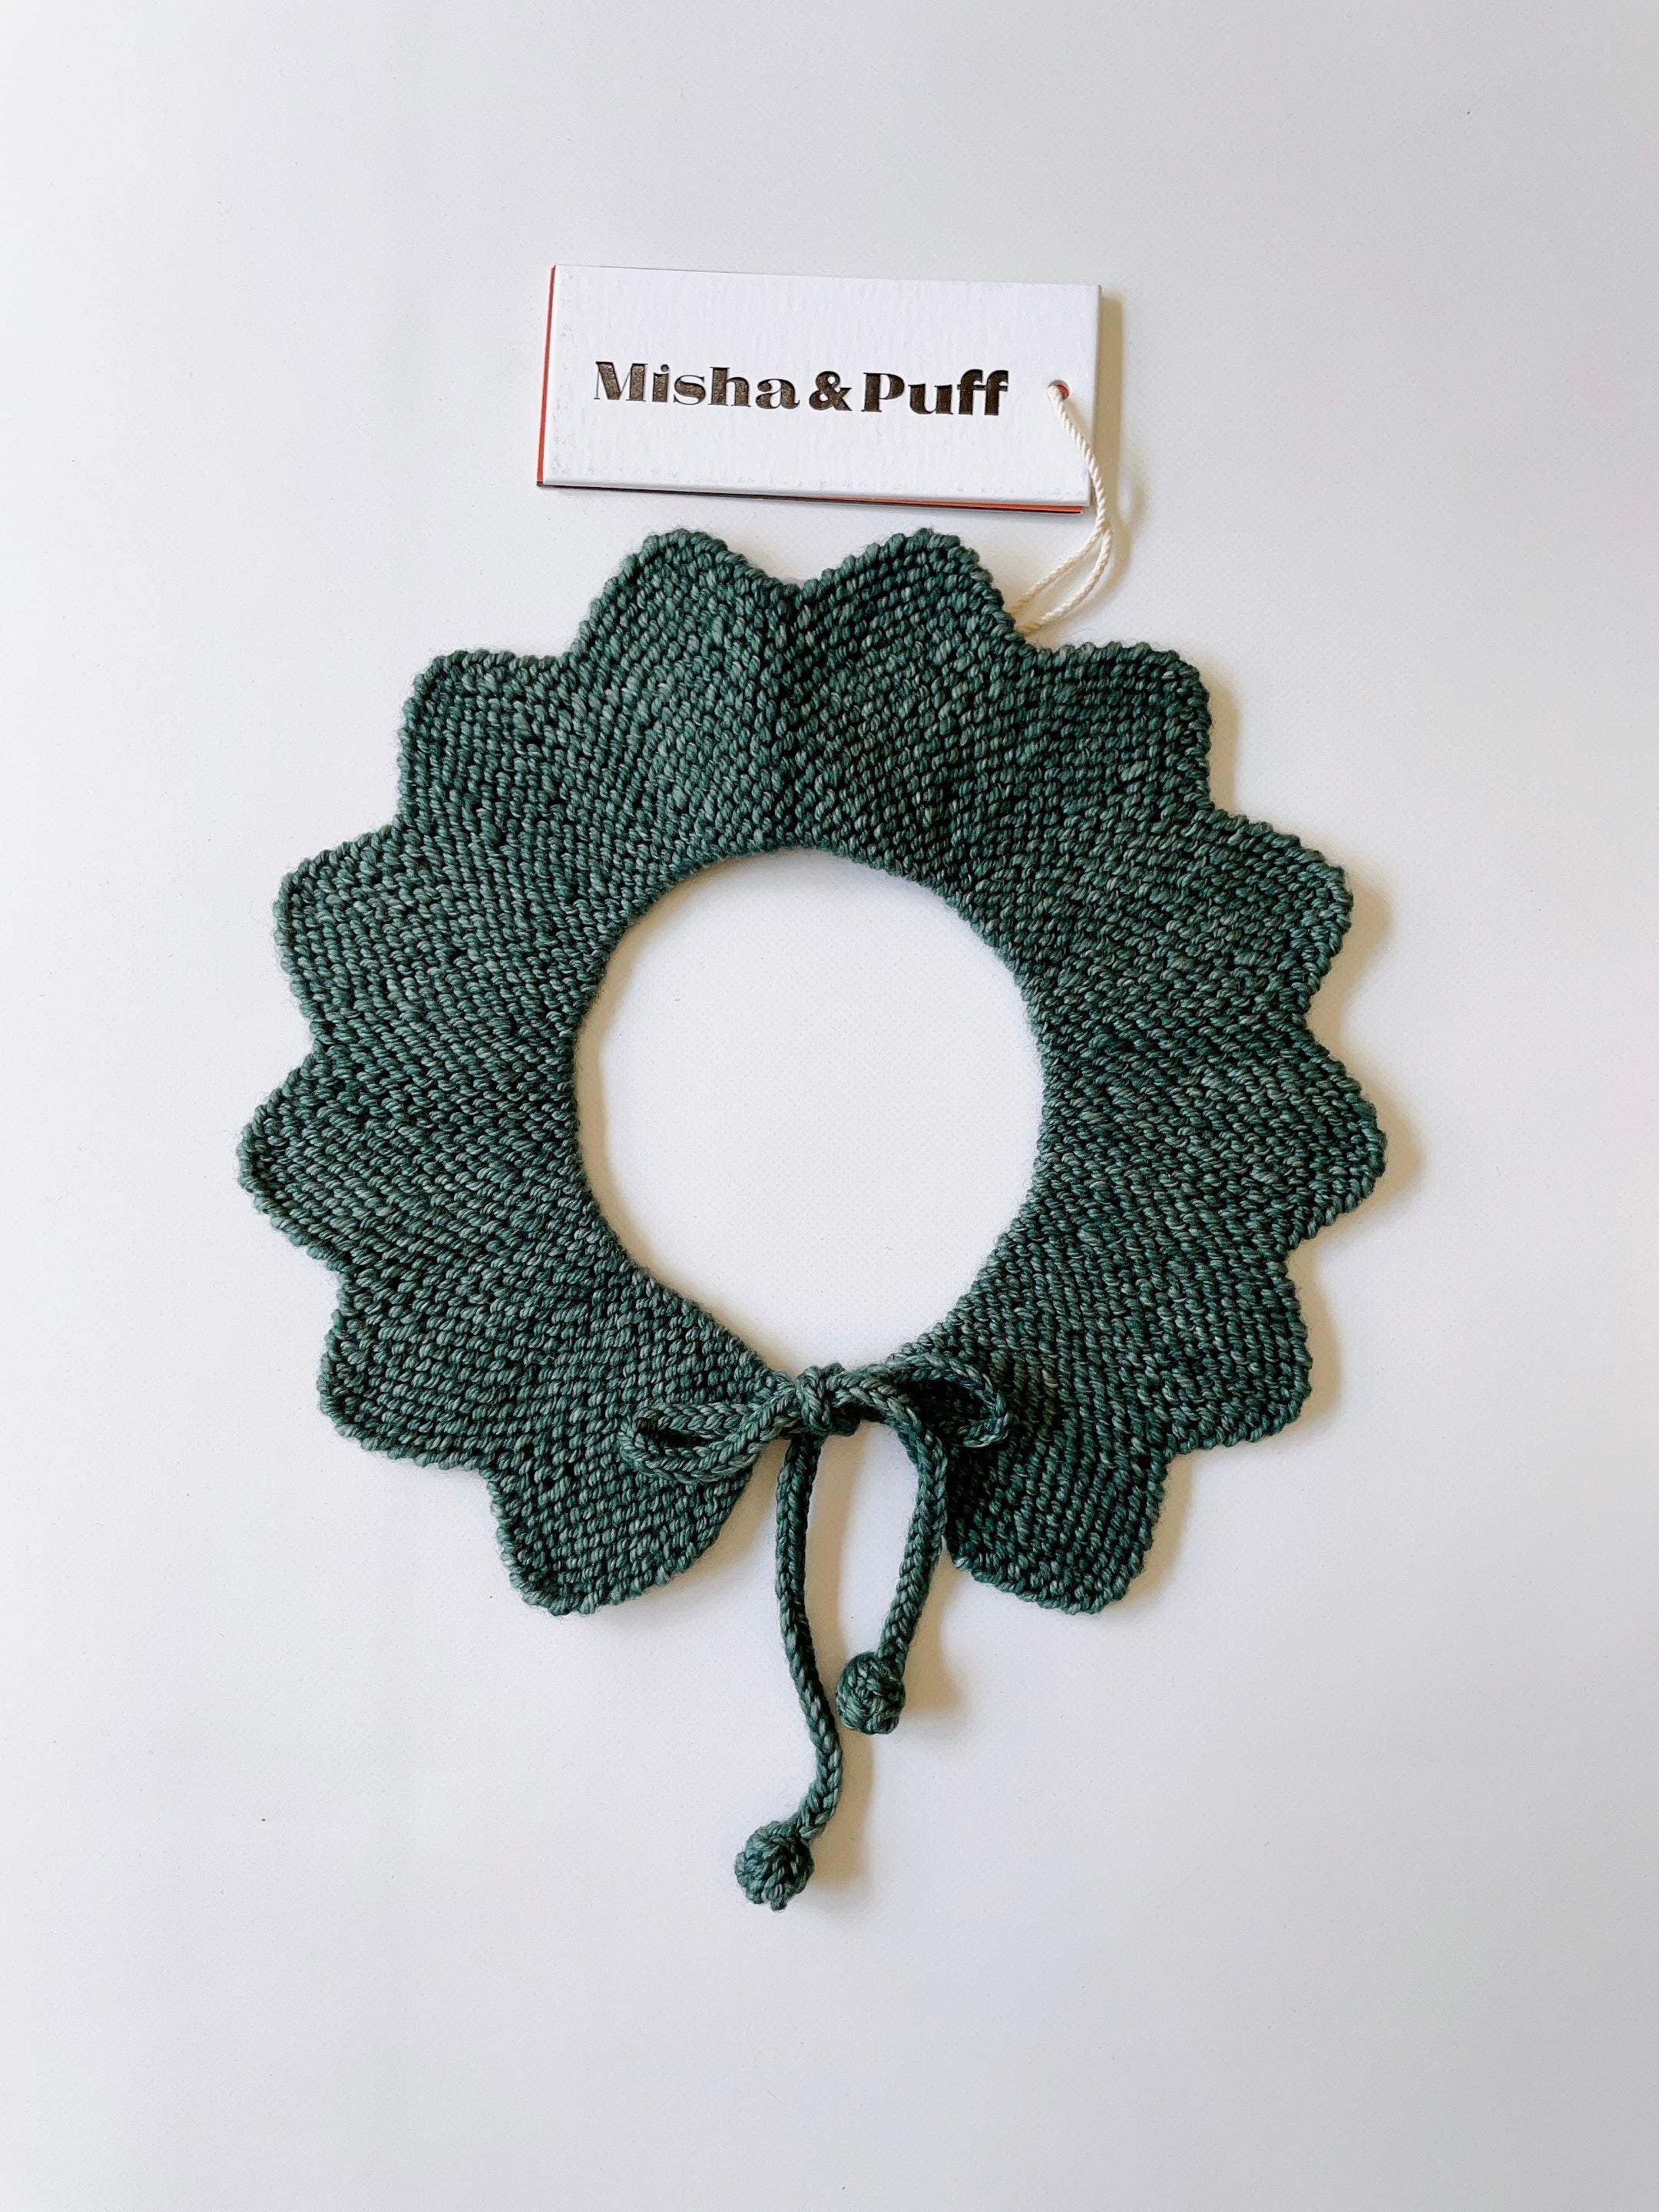 □ misha and puff flower collar campgreen